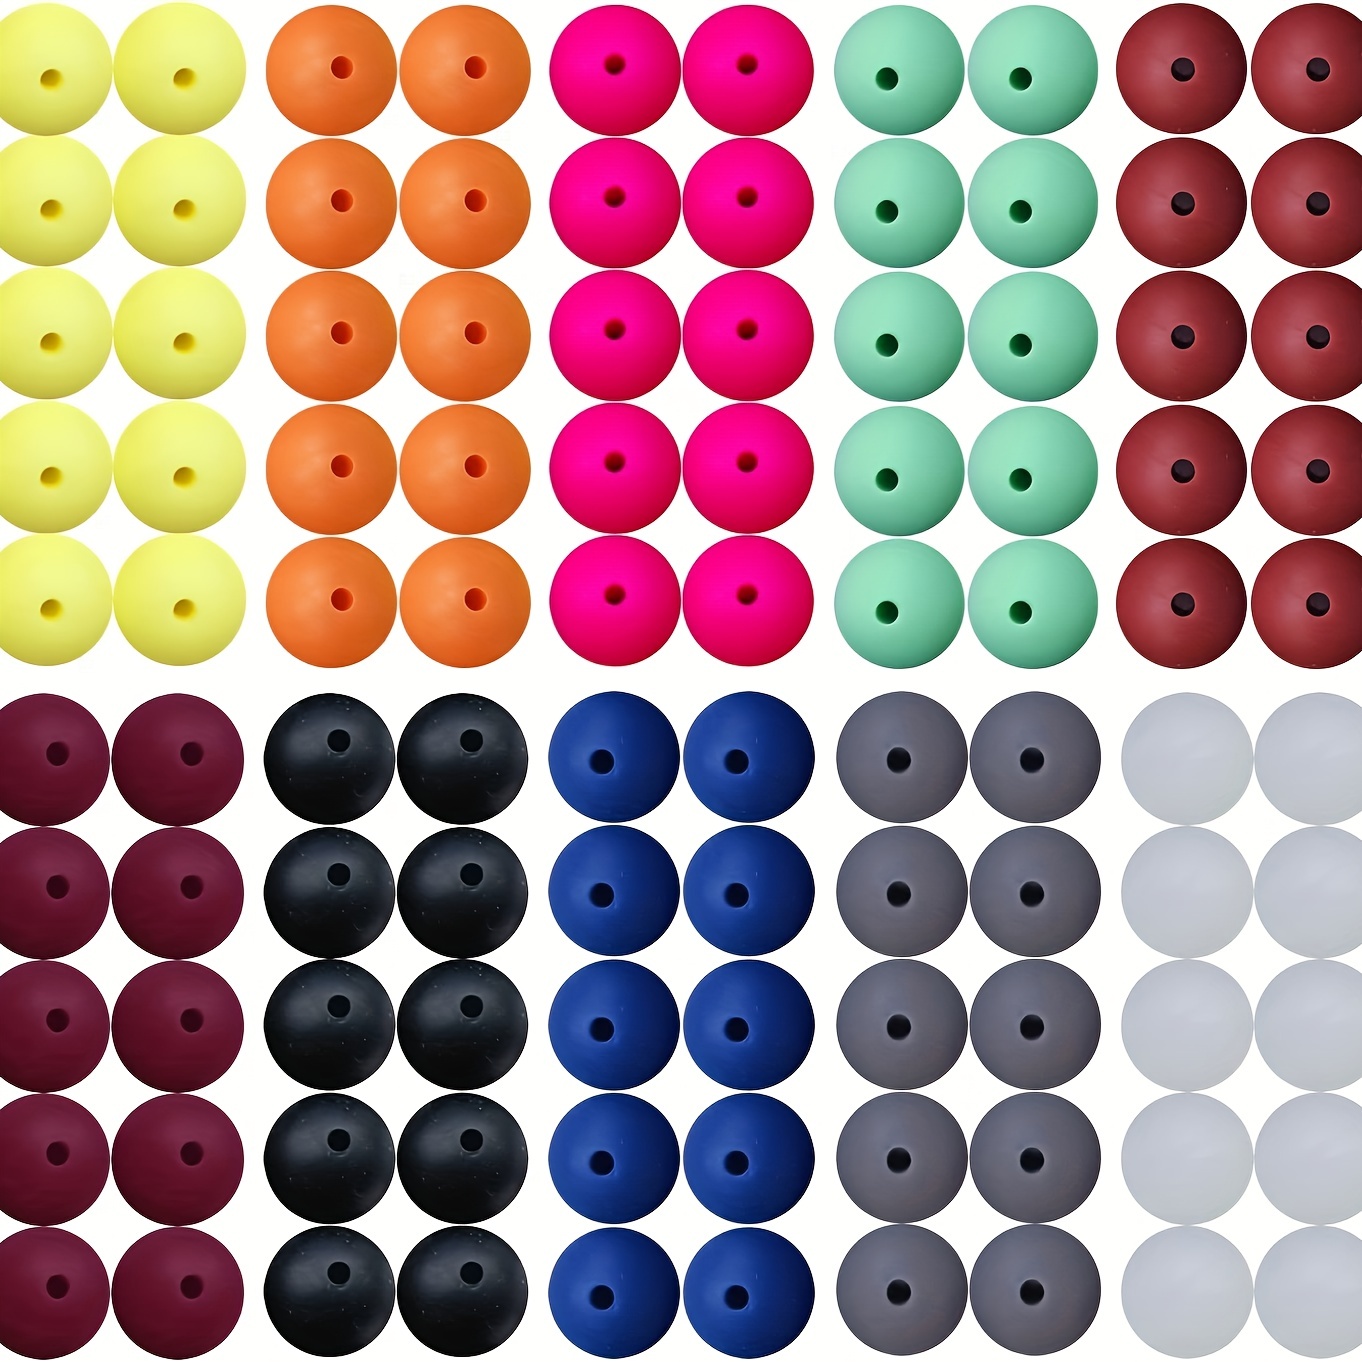 China Factory 18Pcs 6 Colors Rainbow Silicone Focal Beads Bulk